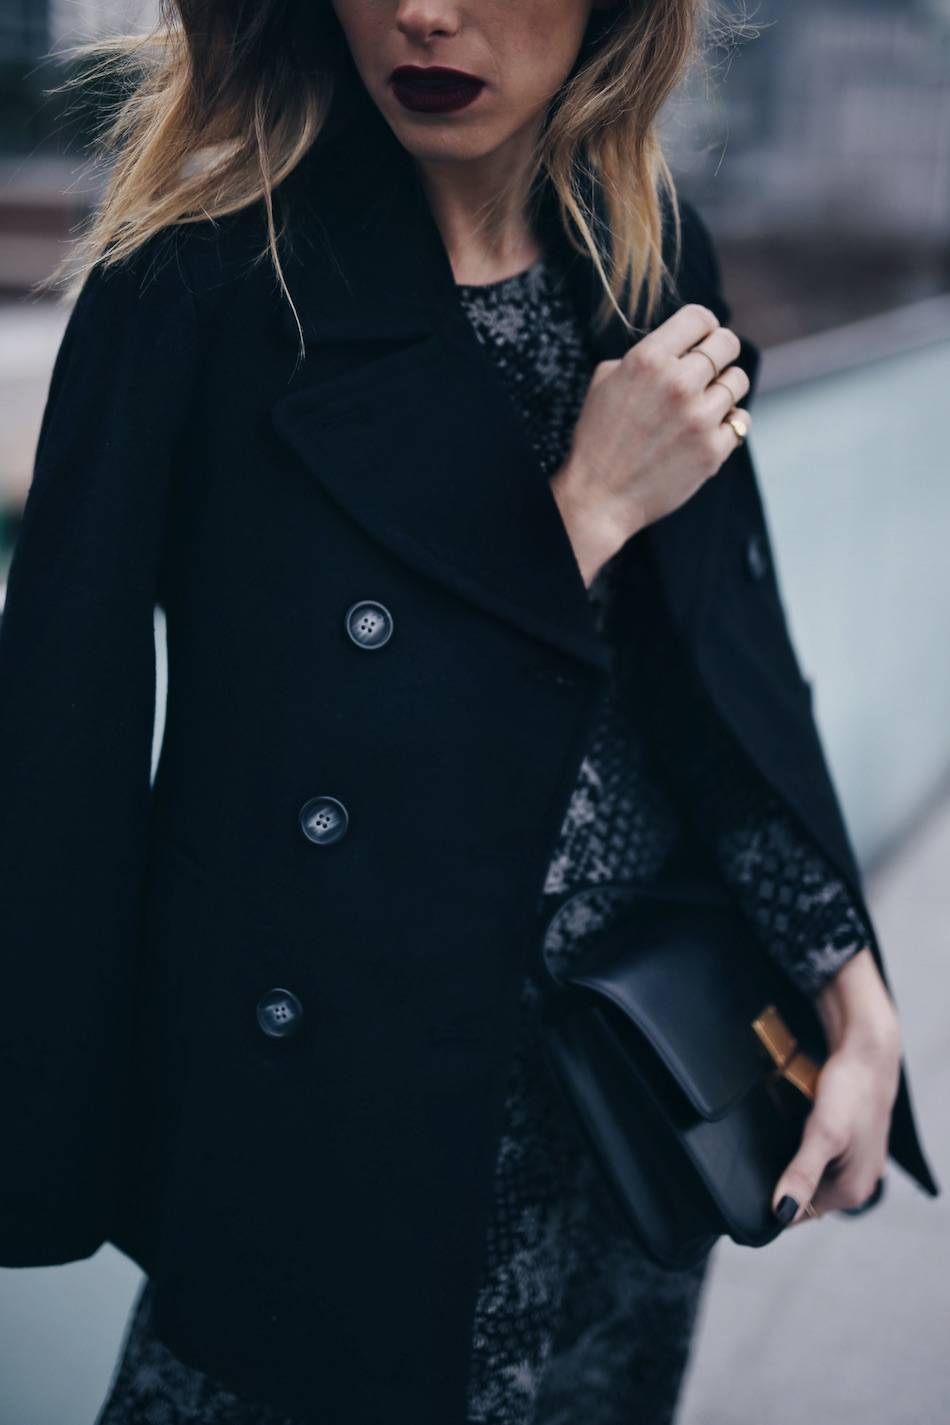 style-blogger-jill-lansky-of-the-august-diaries-showing-holiday-outfit-ideas-2016-in-old-navy-print-dress-celine-box-bag-and-black-peacoat